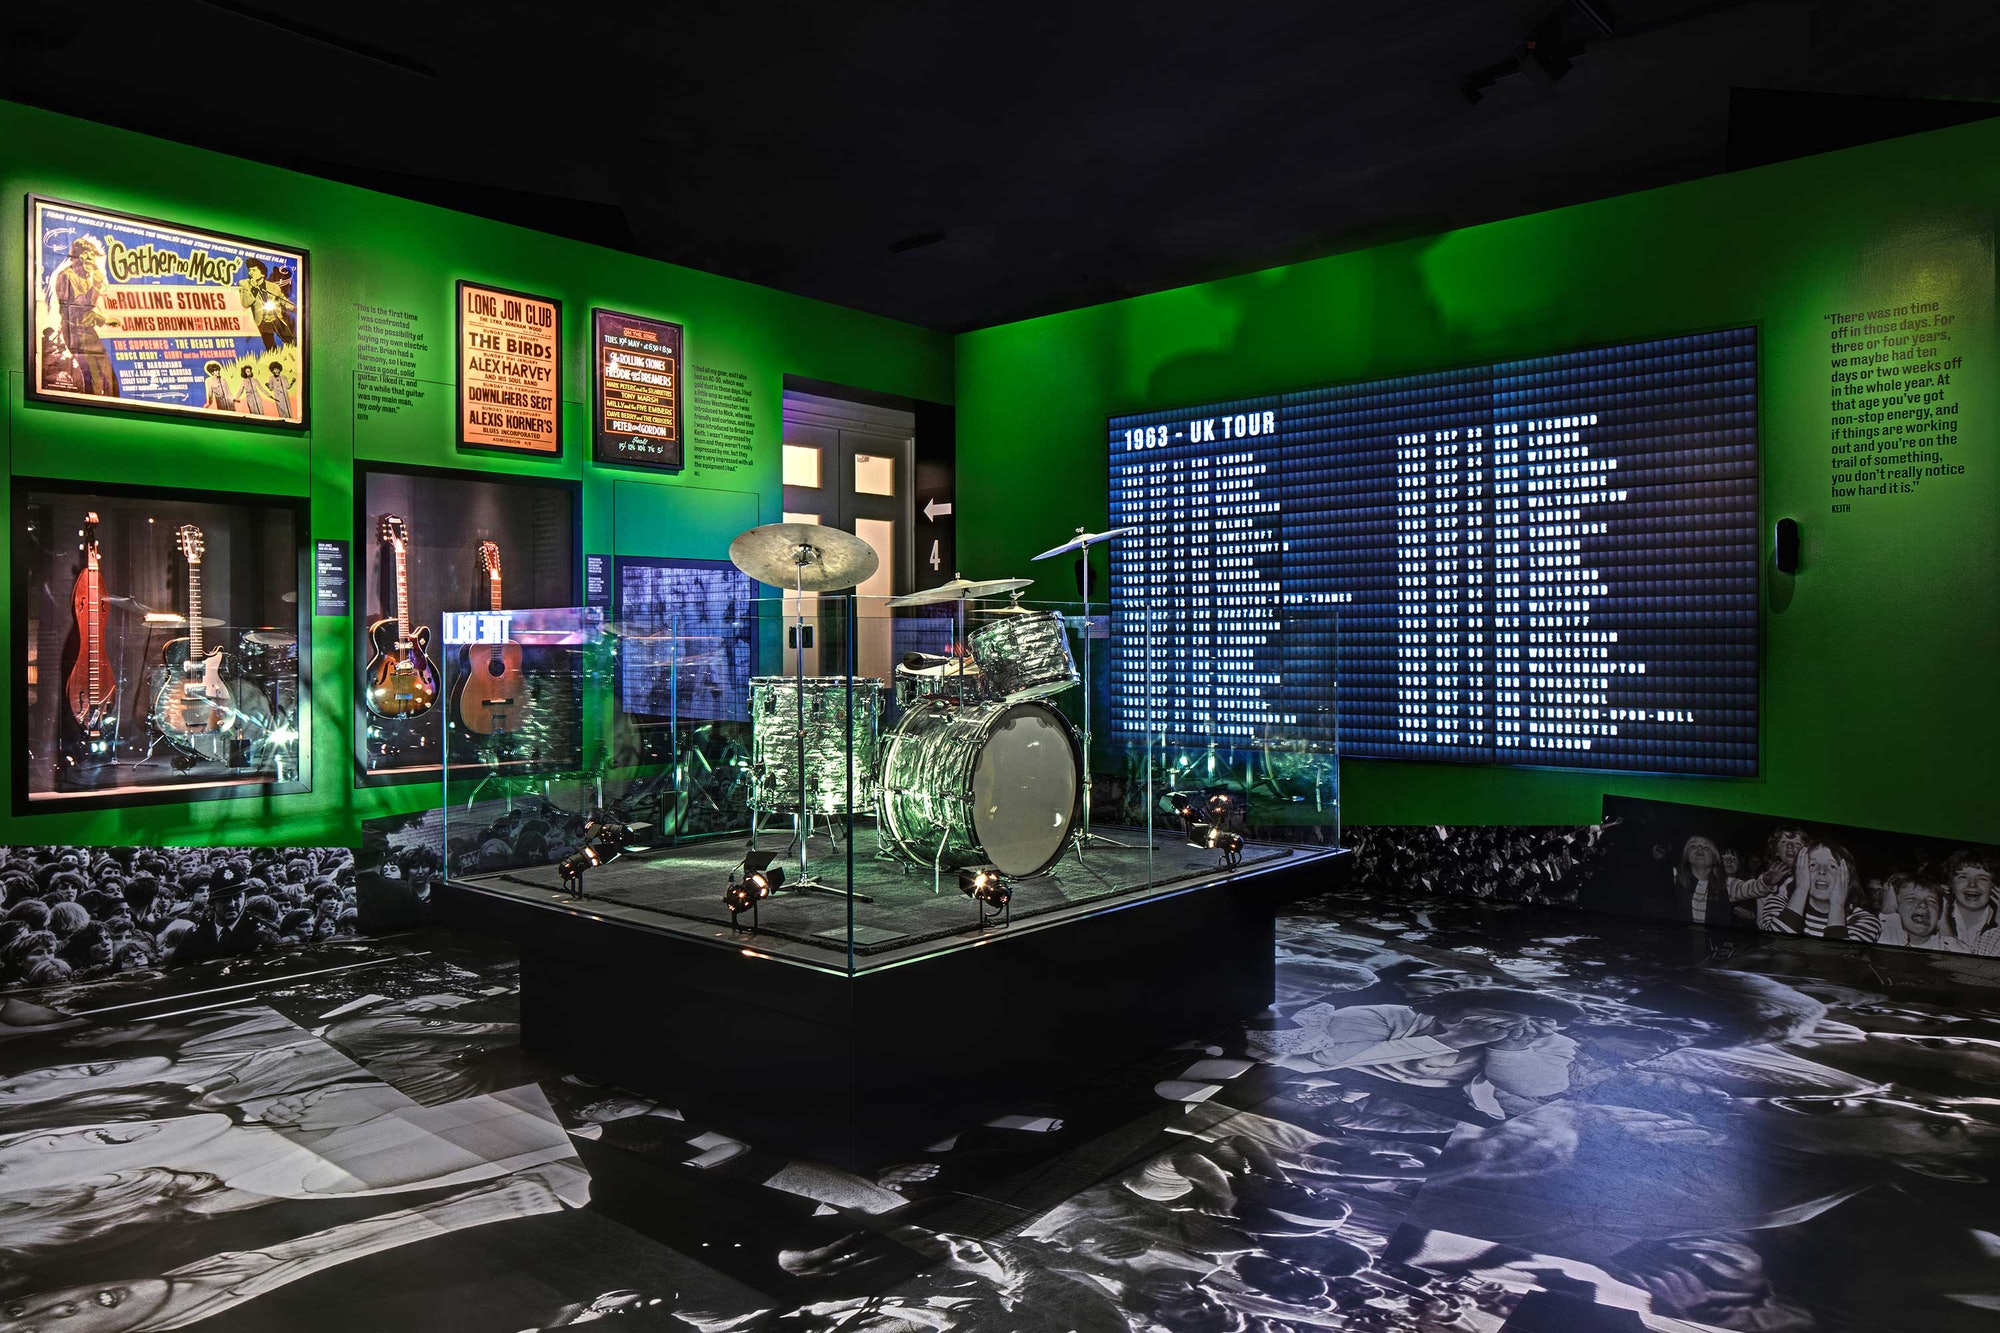 Rolling Stones Exhibitionism - Project